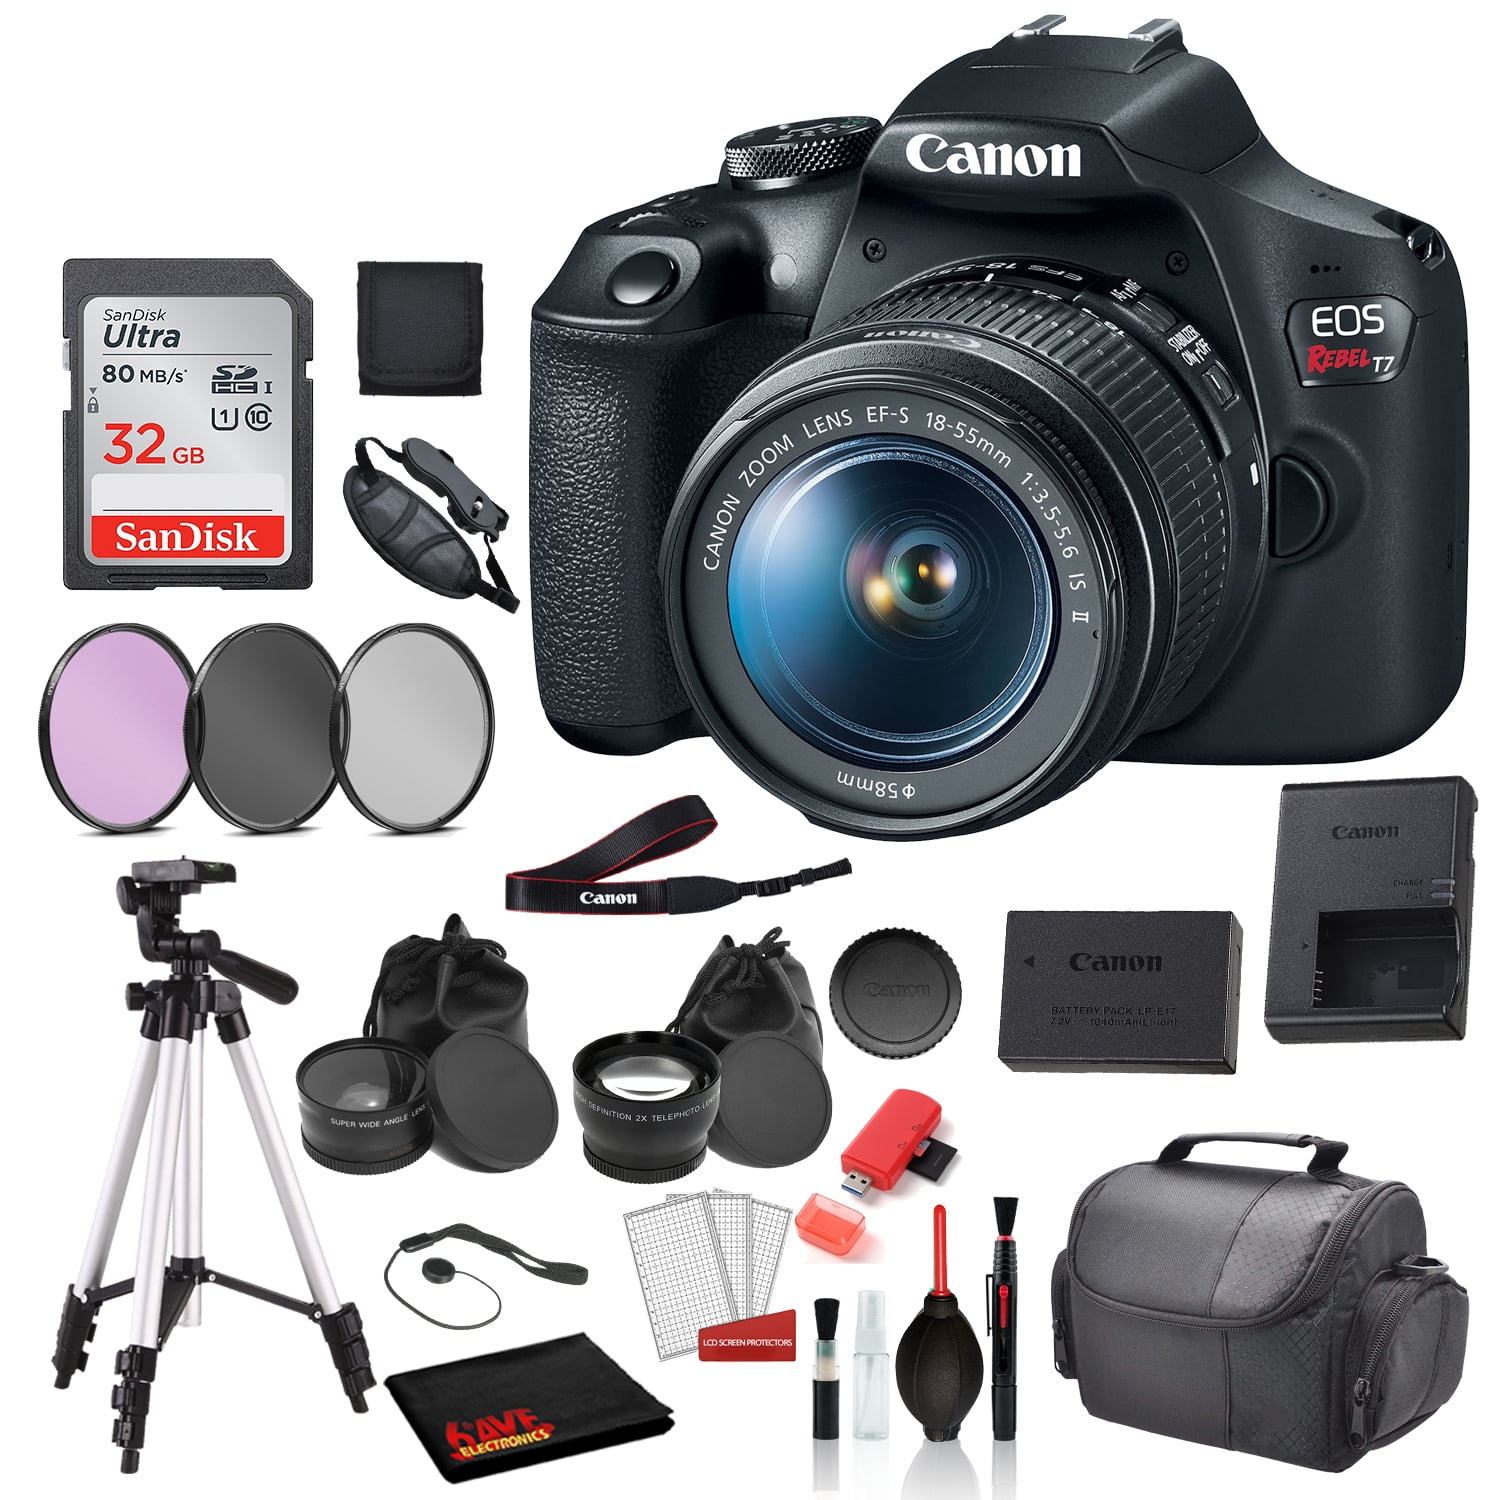 Canon EOS 4000D DSLR Camera with 18-55mm f/3.5-5.6 Zoom Lens,32GB Memory,  Case,Tripod w/Hand Grip and More(28pc Bundle)